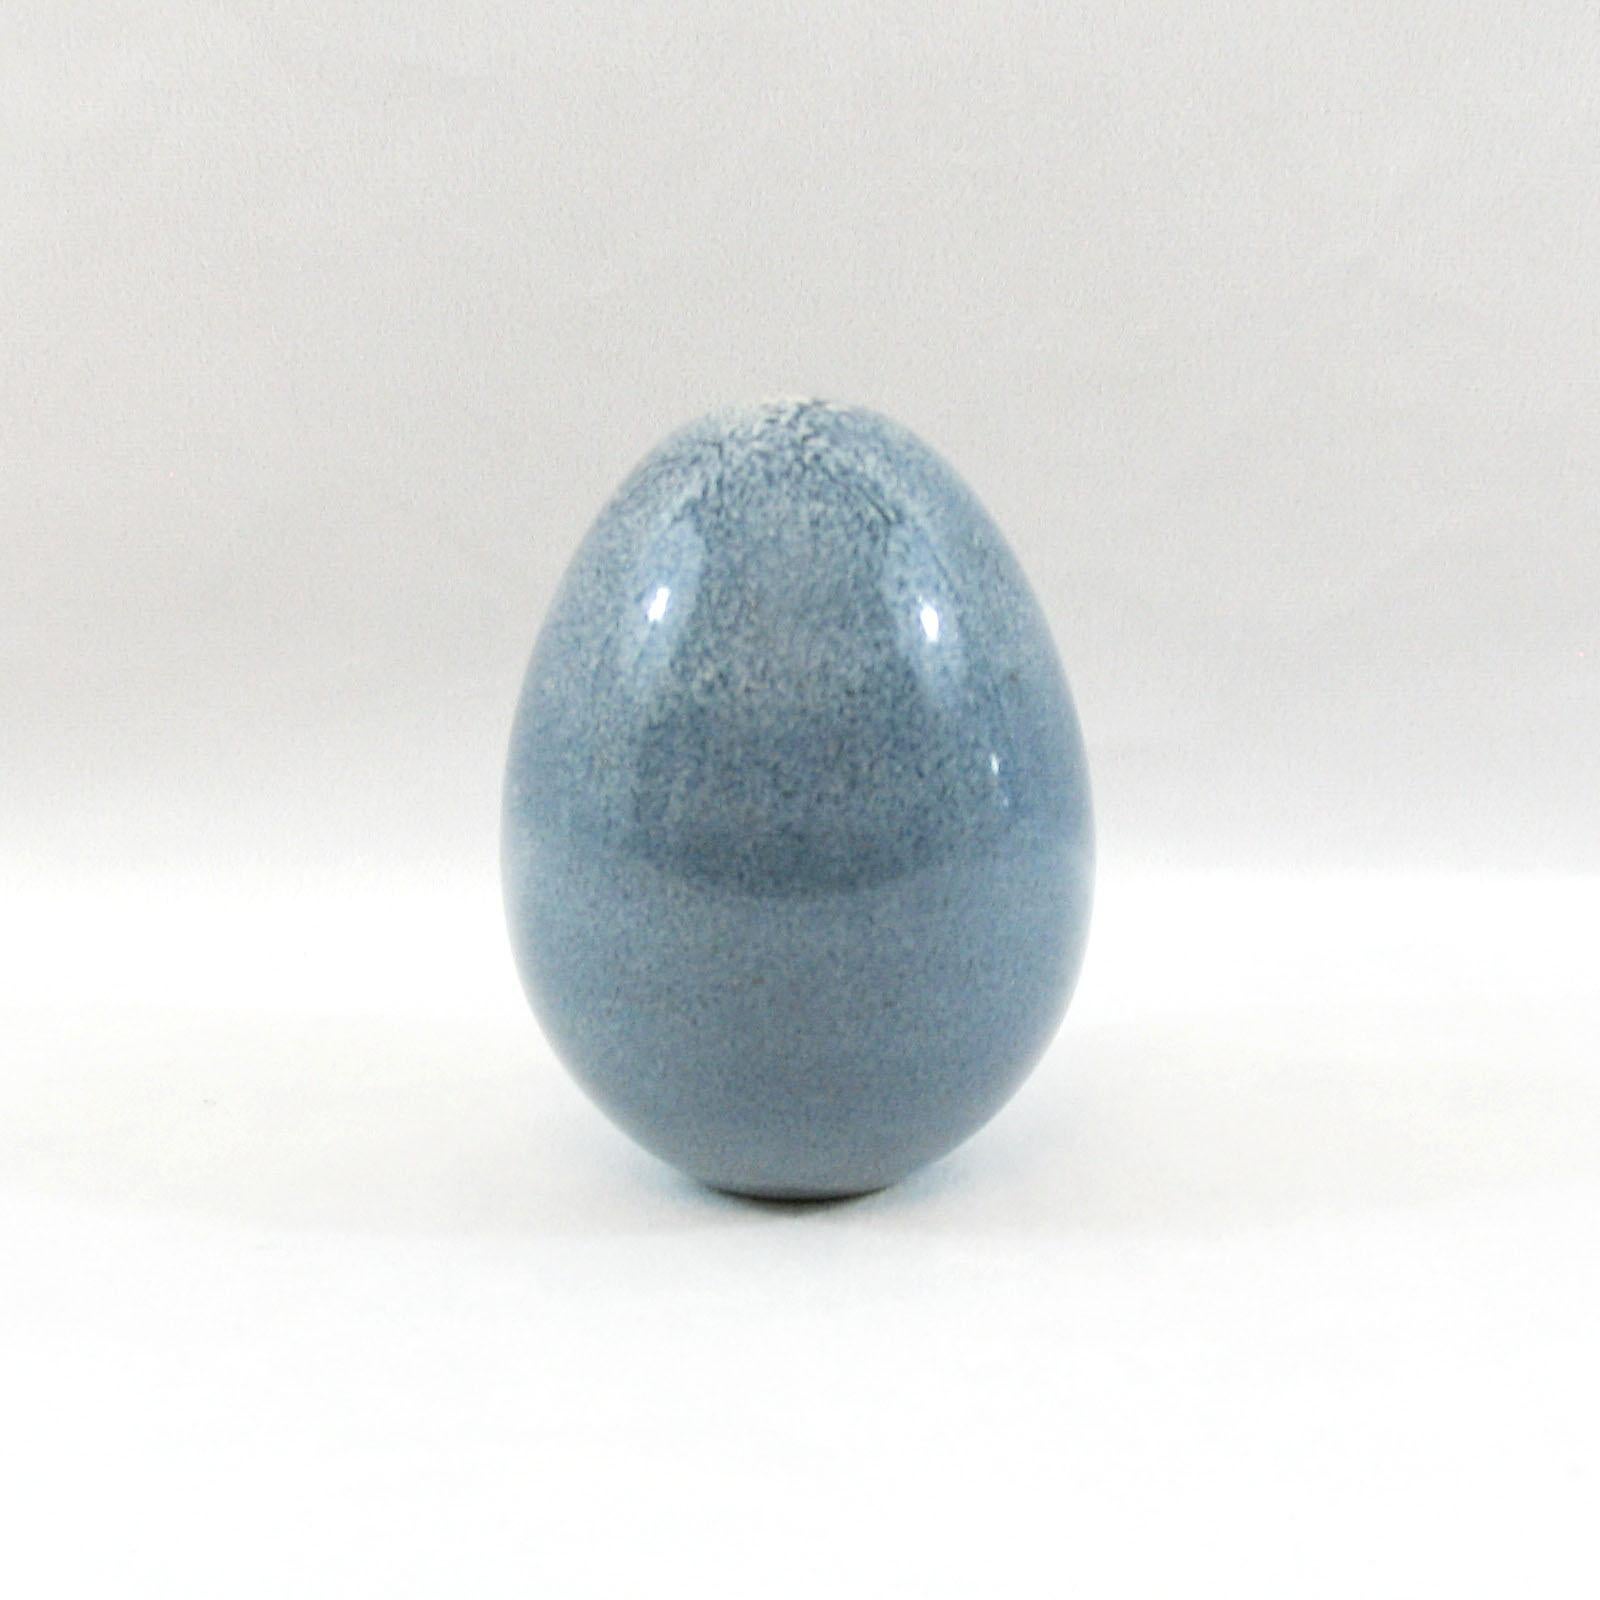 Ceramic egg sculpture designed by Per Liliengren, Sweden, 1960s. Stoneware. Signed to the bottom.

Dimensions: Height 10 cm, weight 235 gr.